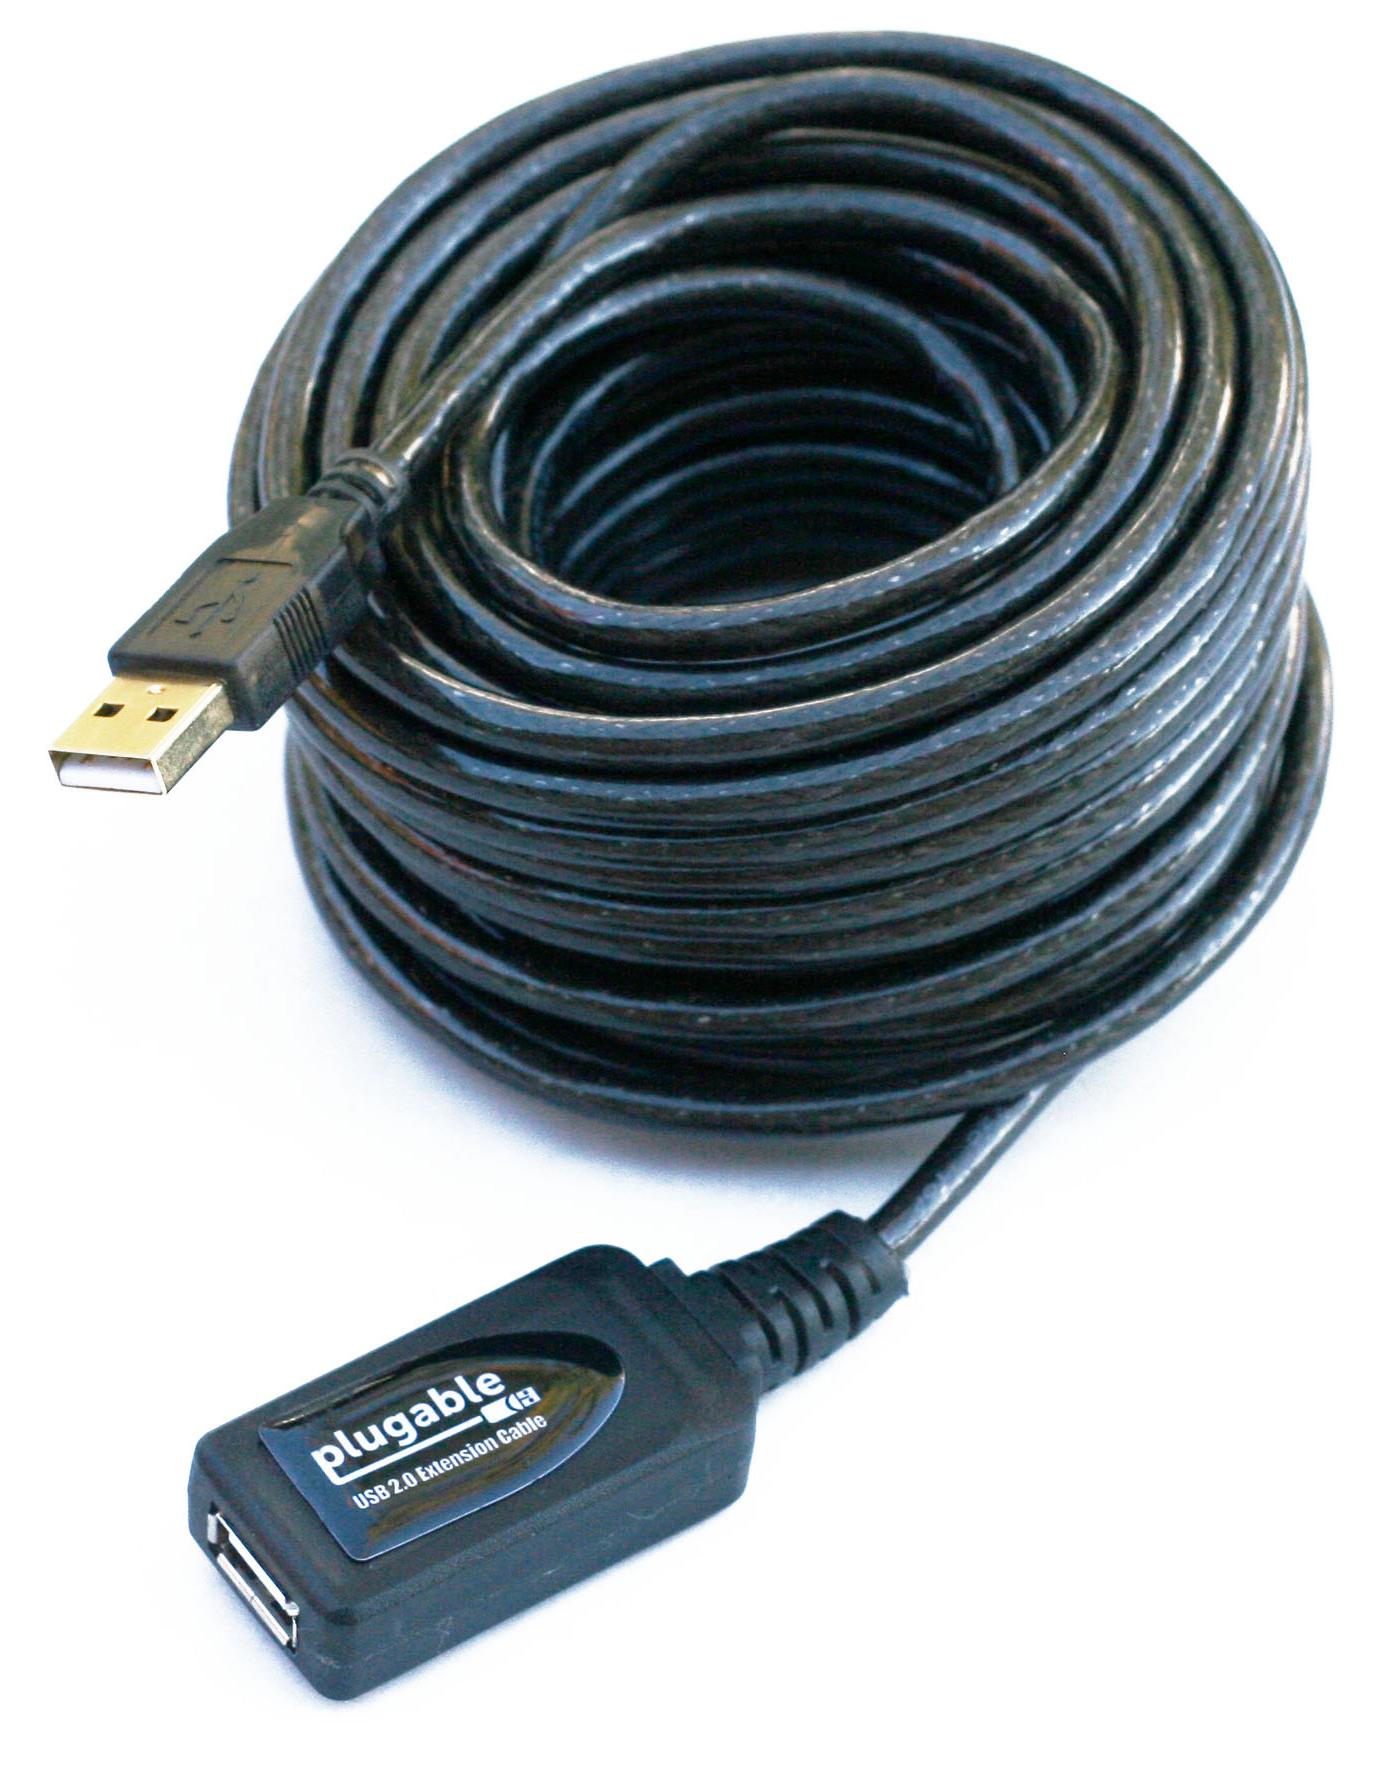 Pack of 4 10 Feet USB 2.0 Extension Cable Black A Male to A Female